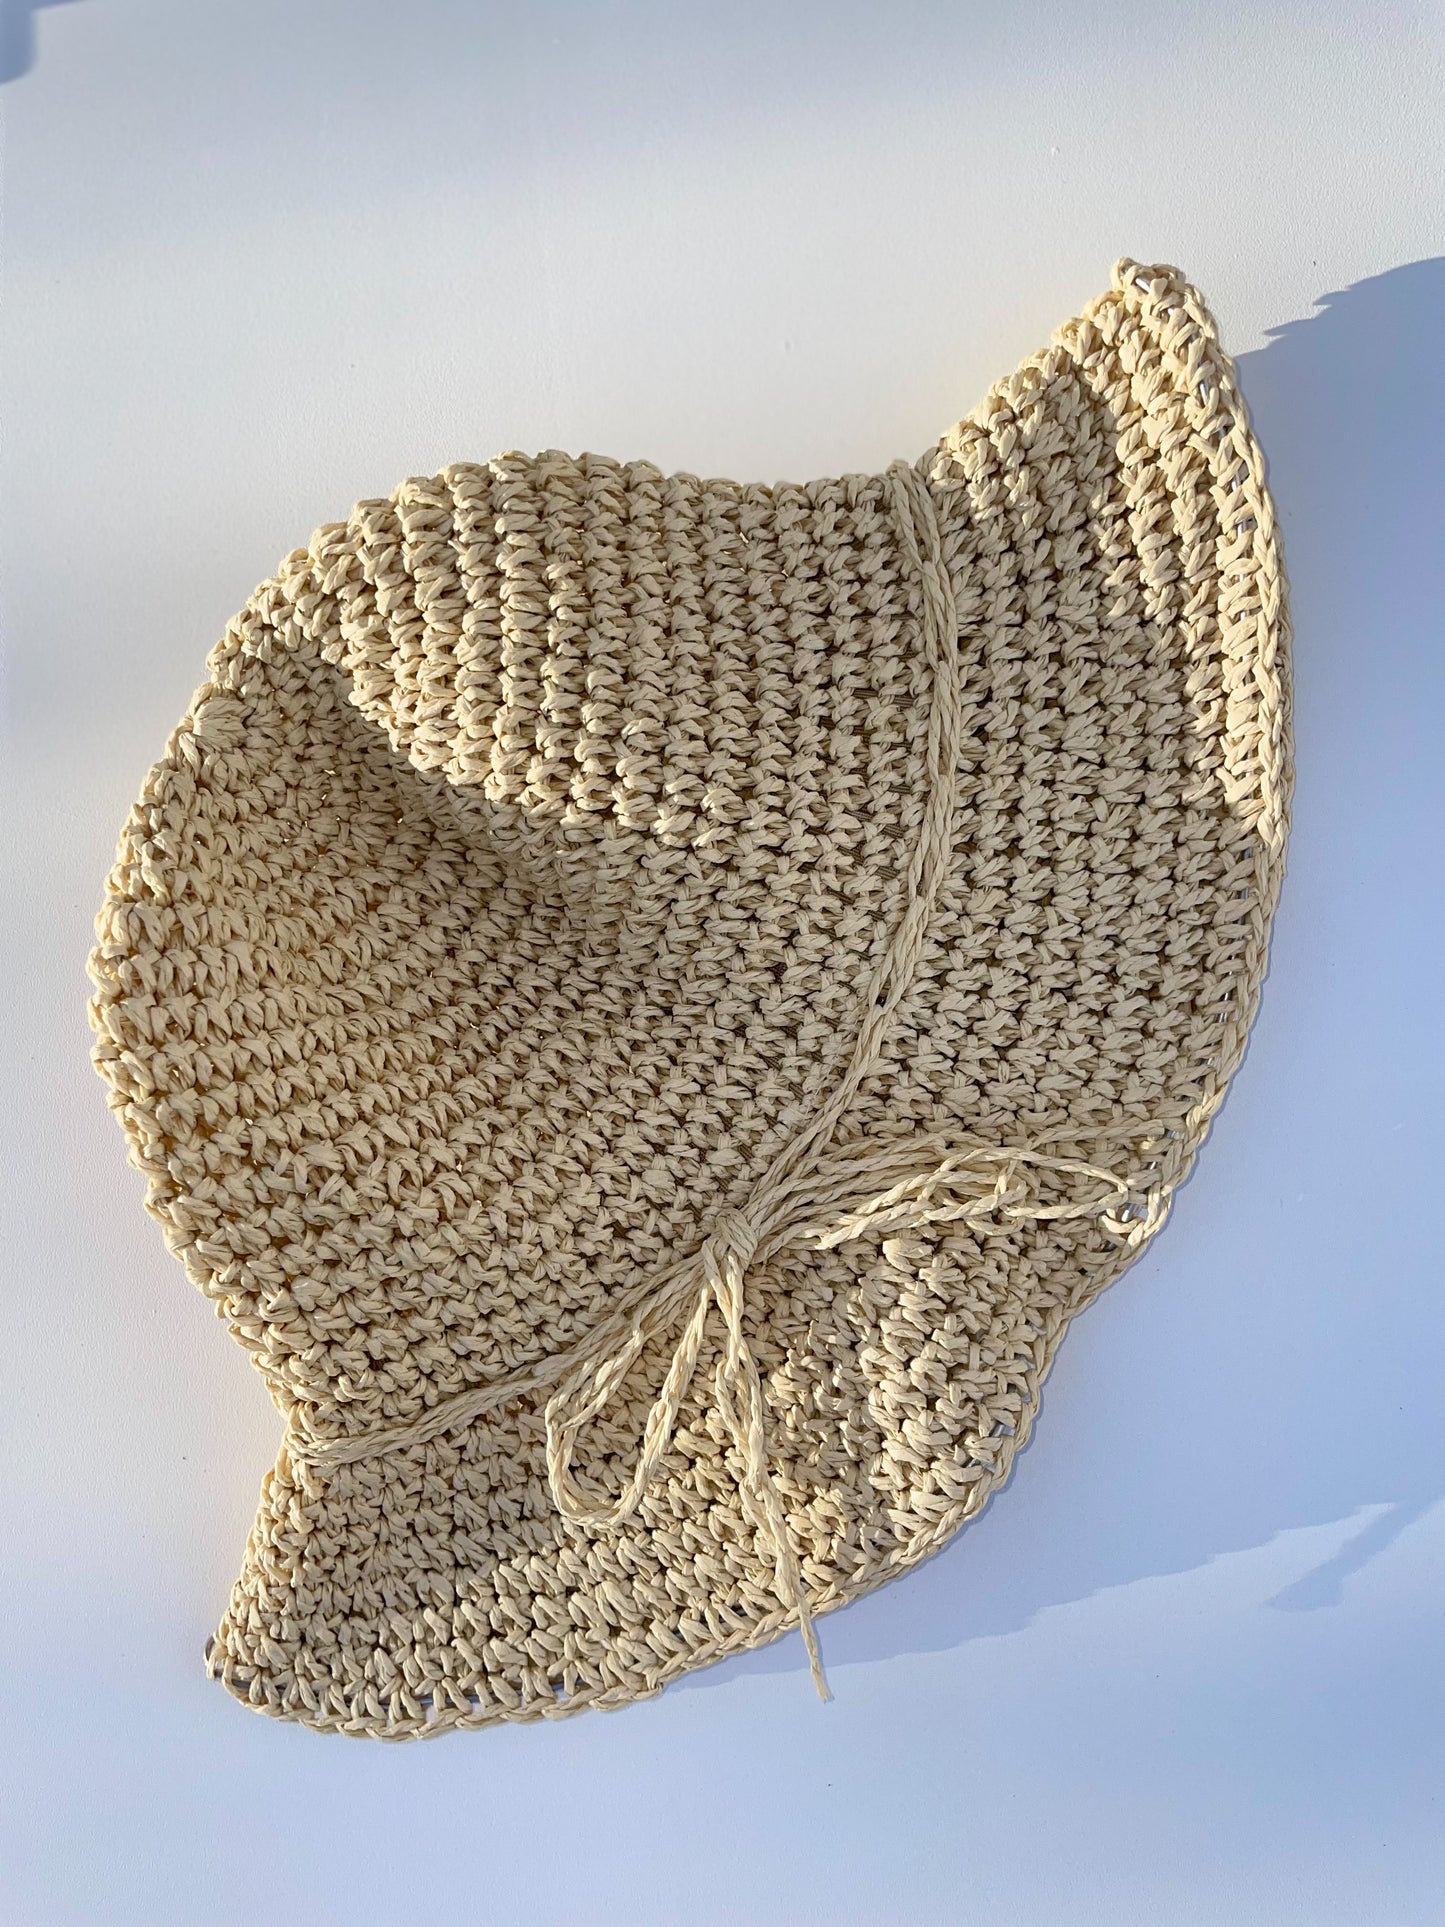 Woven Straw hat